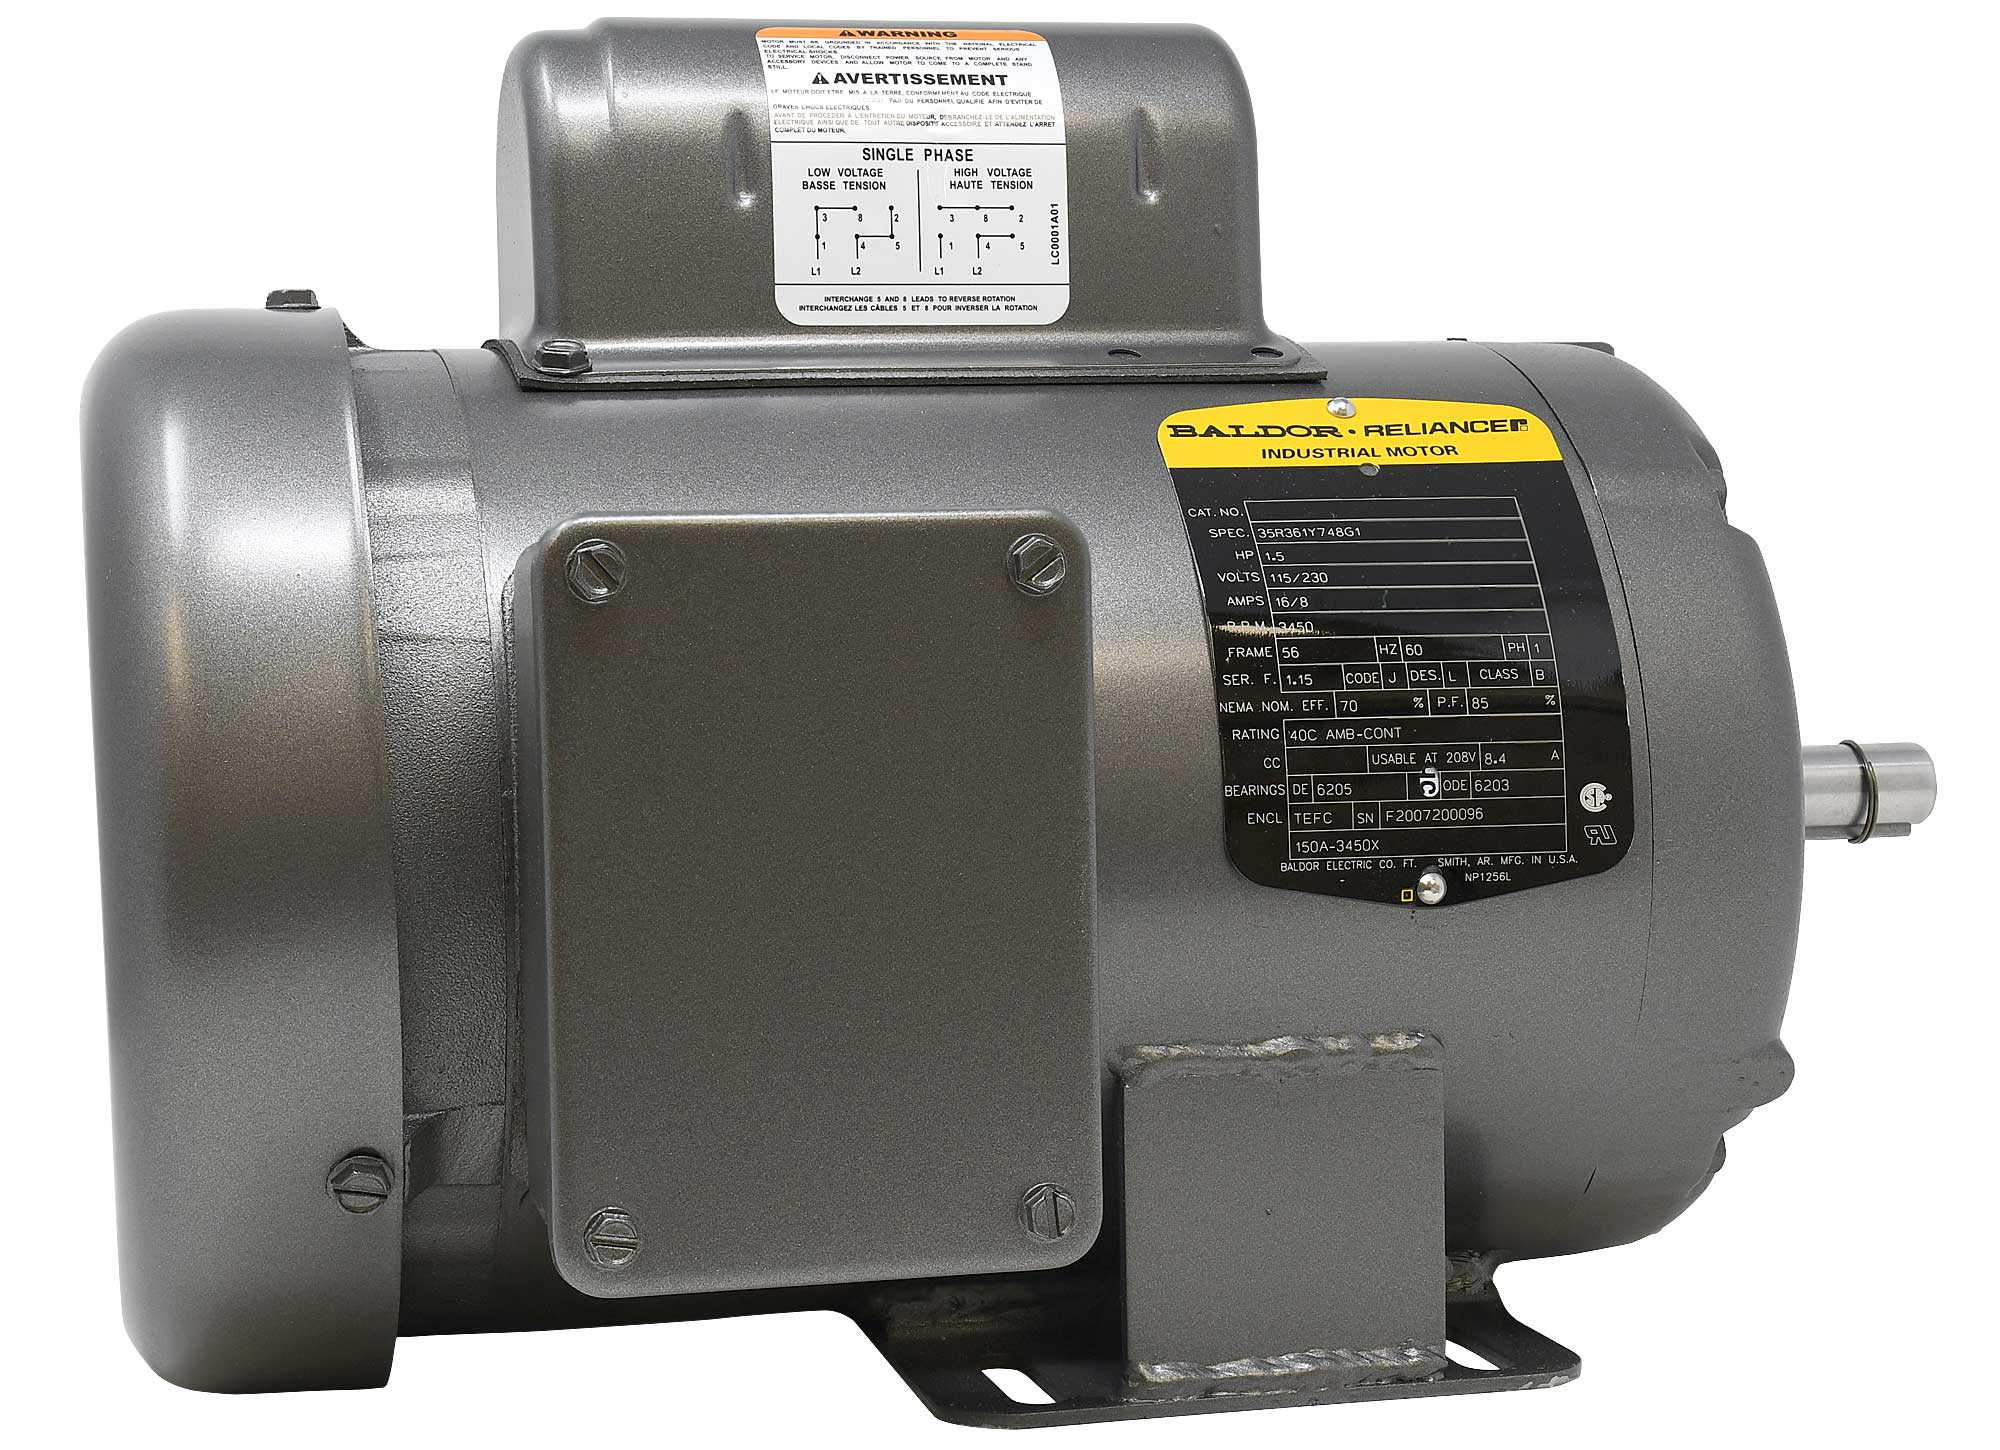 150A-3450X motor for the VibraKing 25 & 45